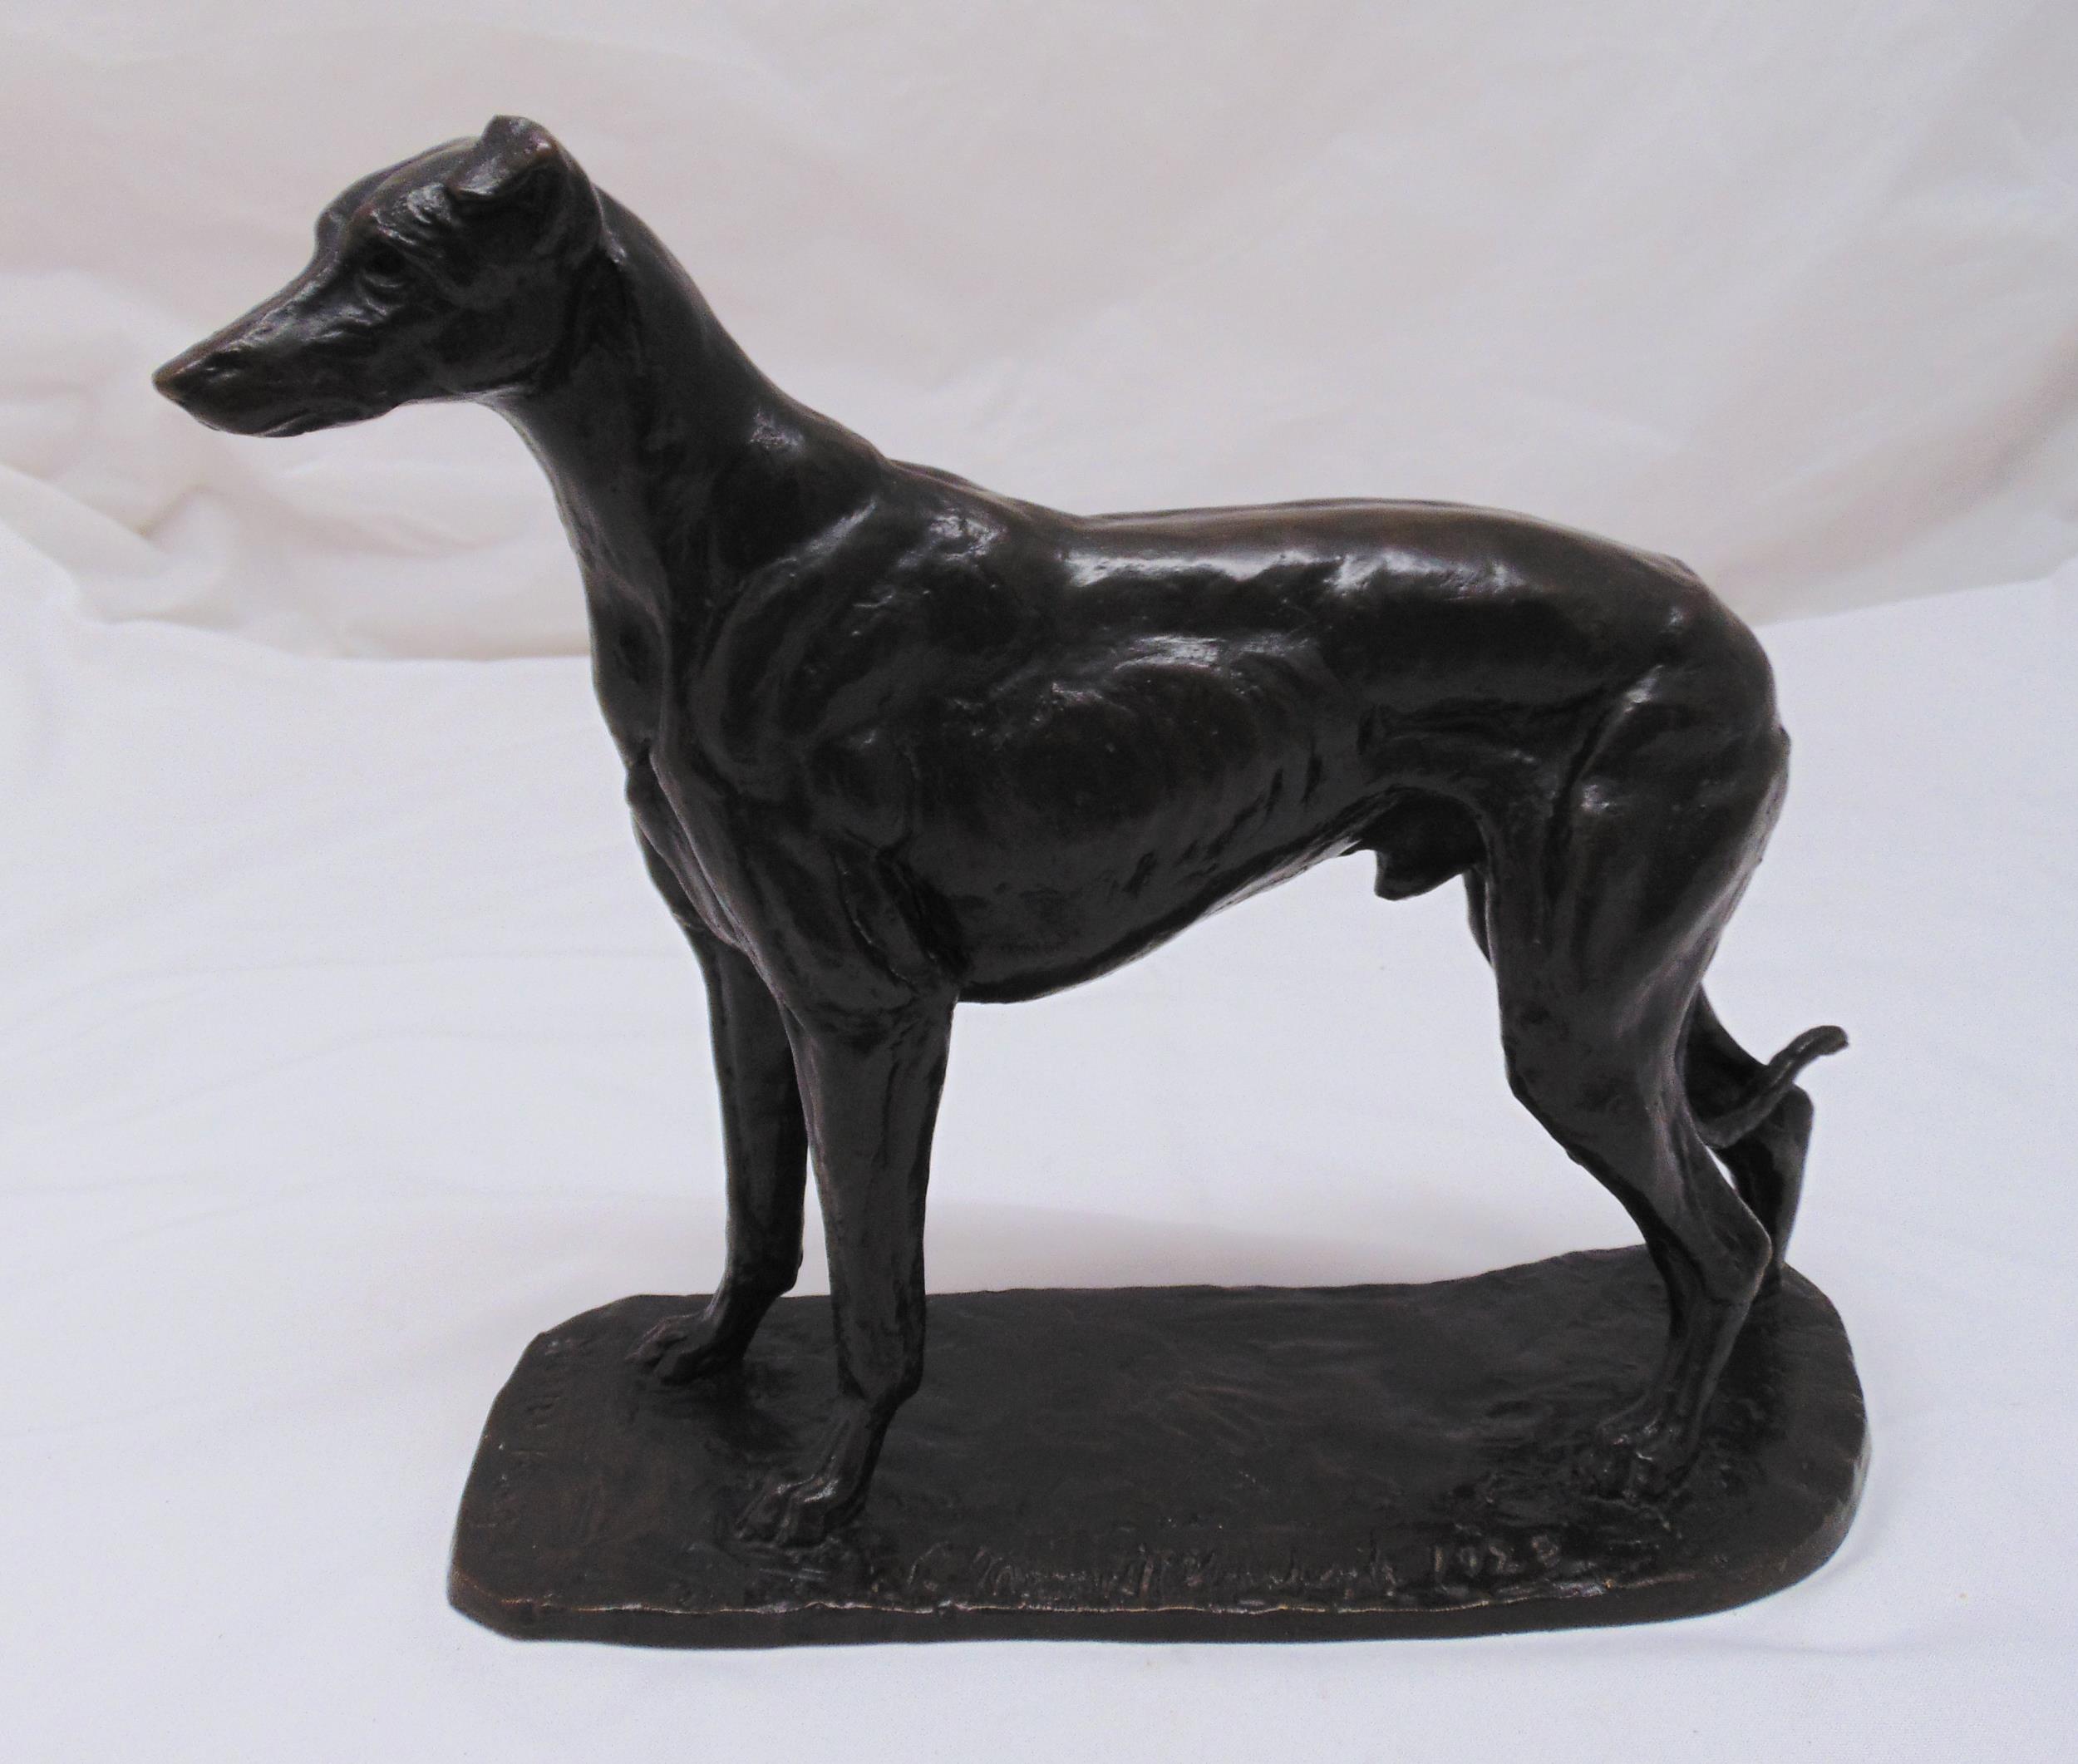 A bronze figurine of a greyhound titled Moon King indistinctly signed and dated 1922, 31.5 x 37 x